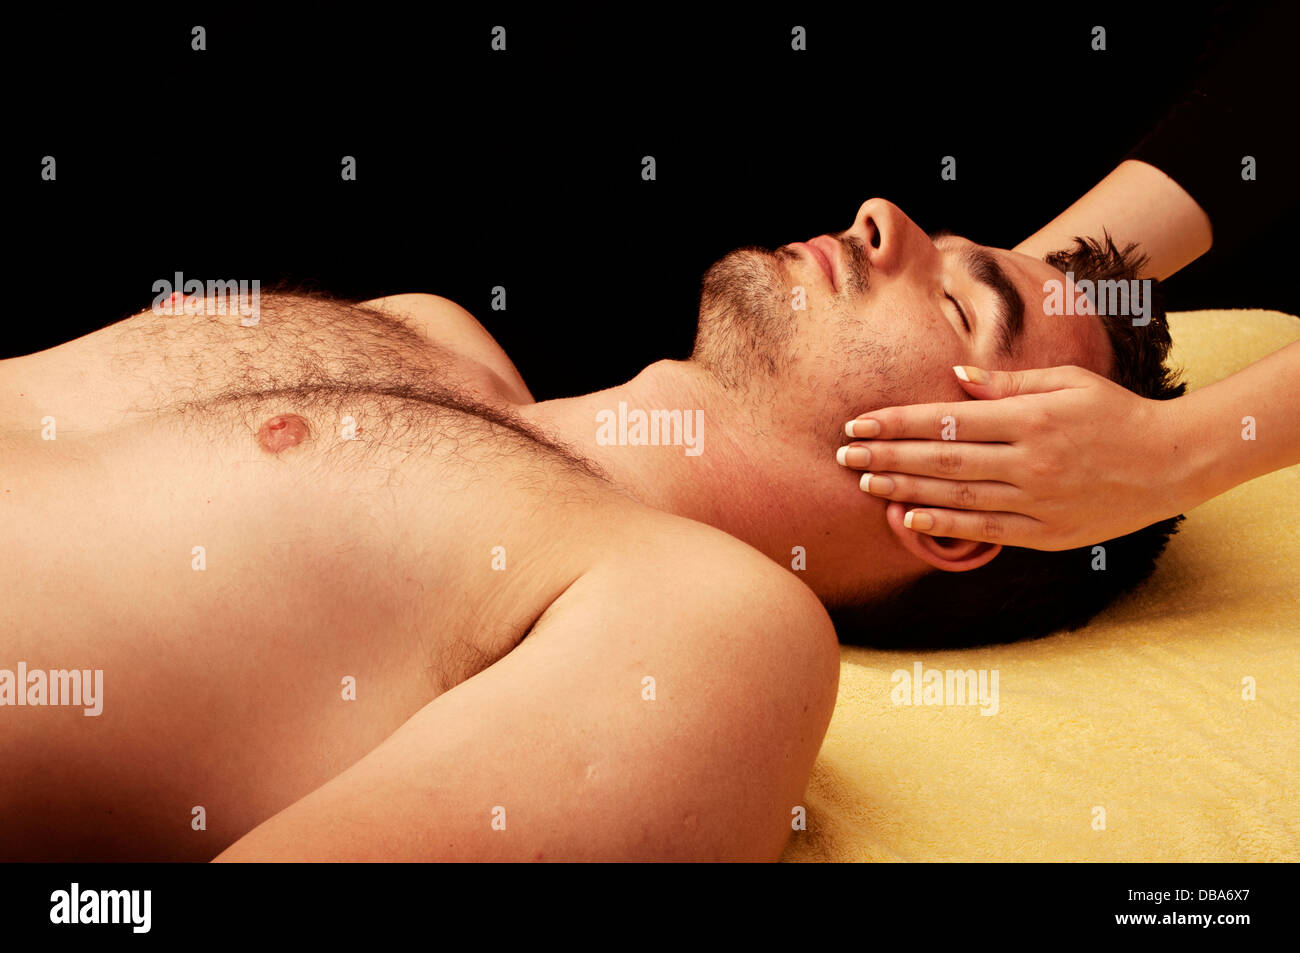 Man getting a face massage Stock Photo